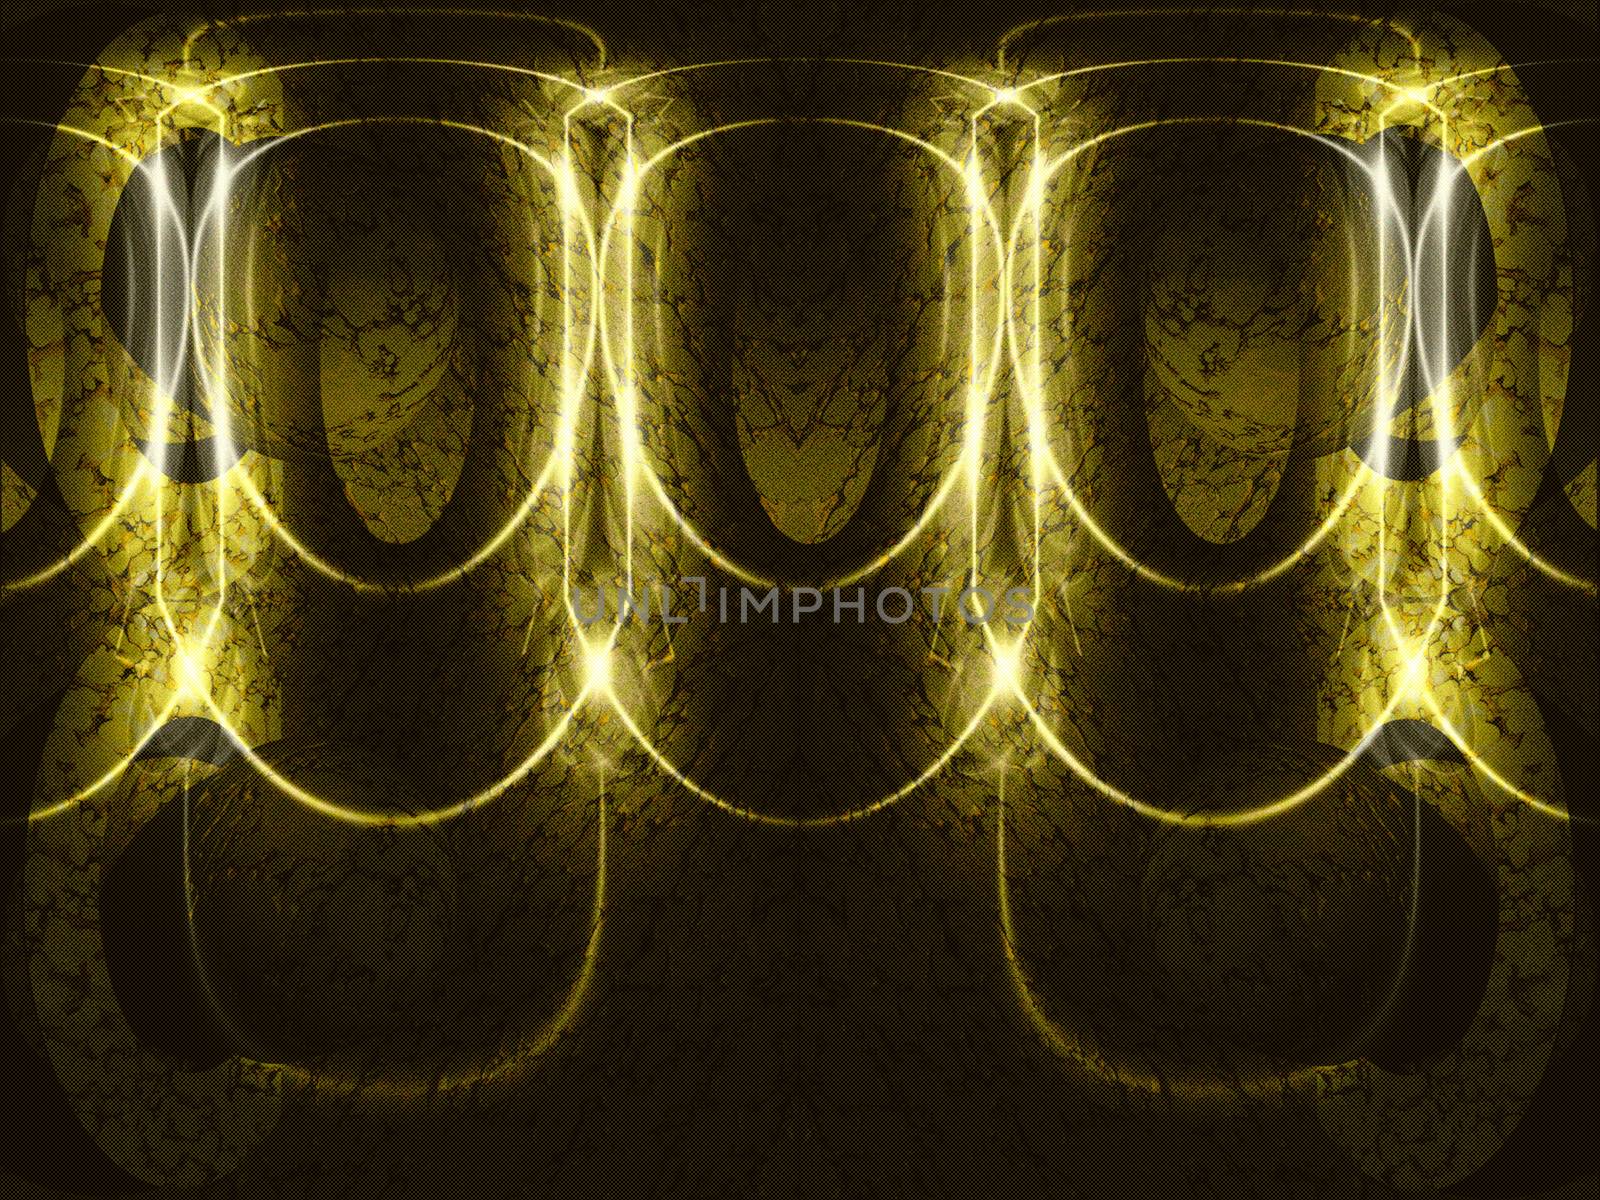 3D abstract textured image, golden background with niches in the wall and illumination